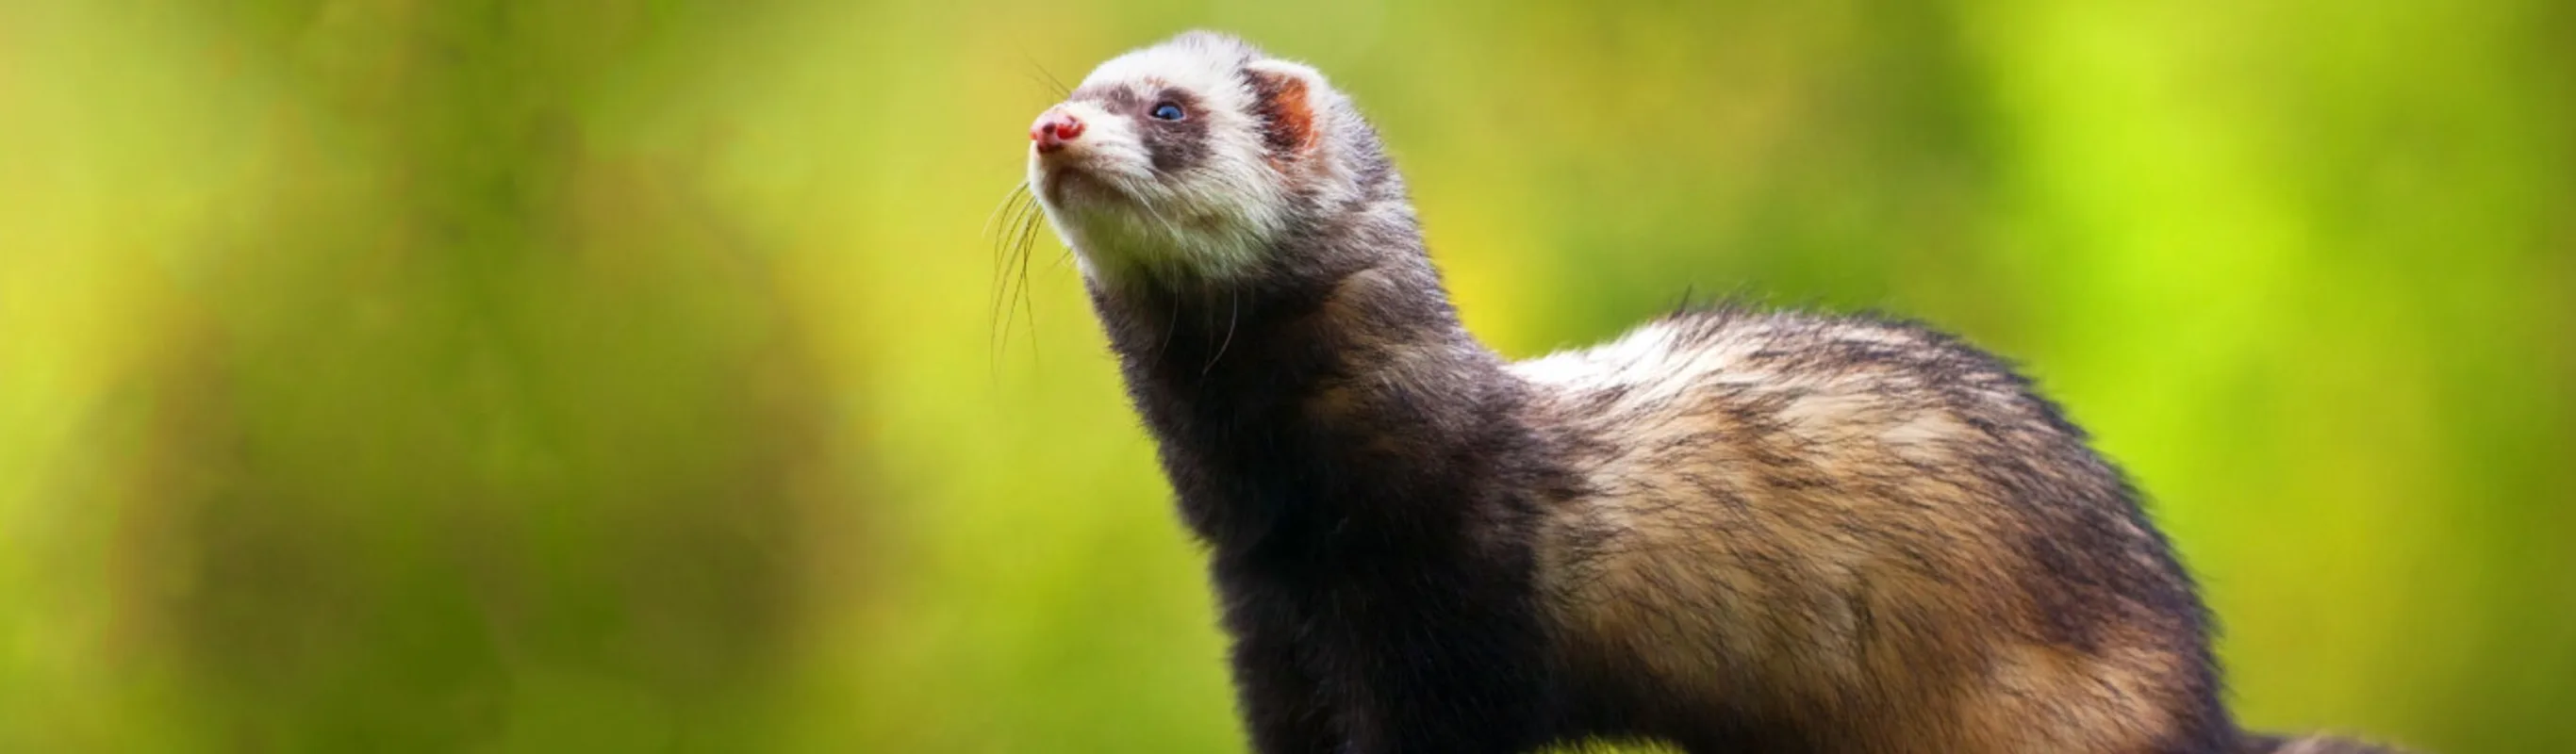 Ferret with blurry green background